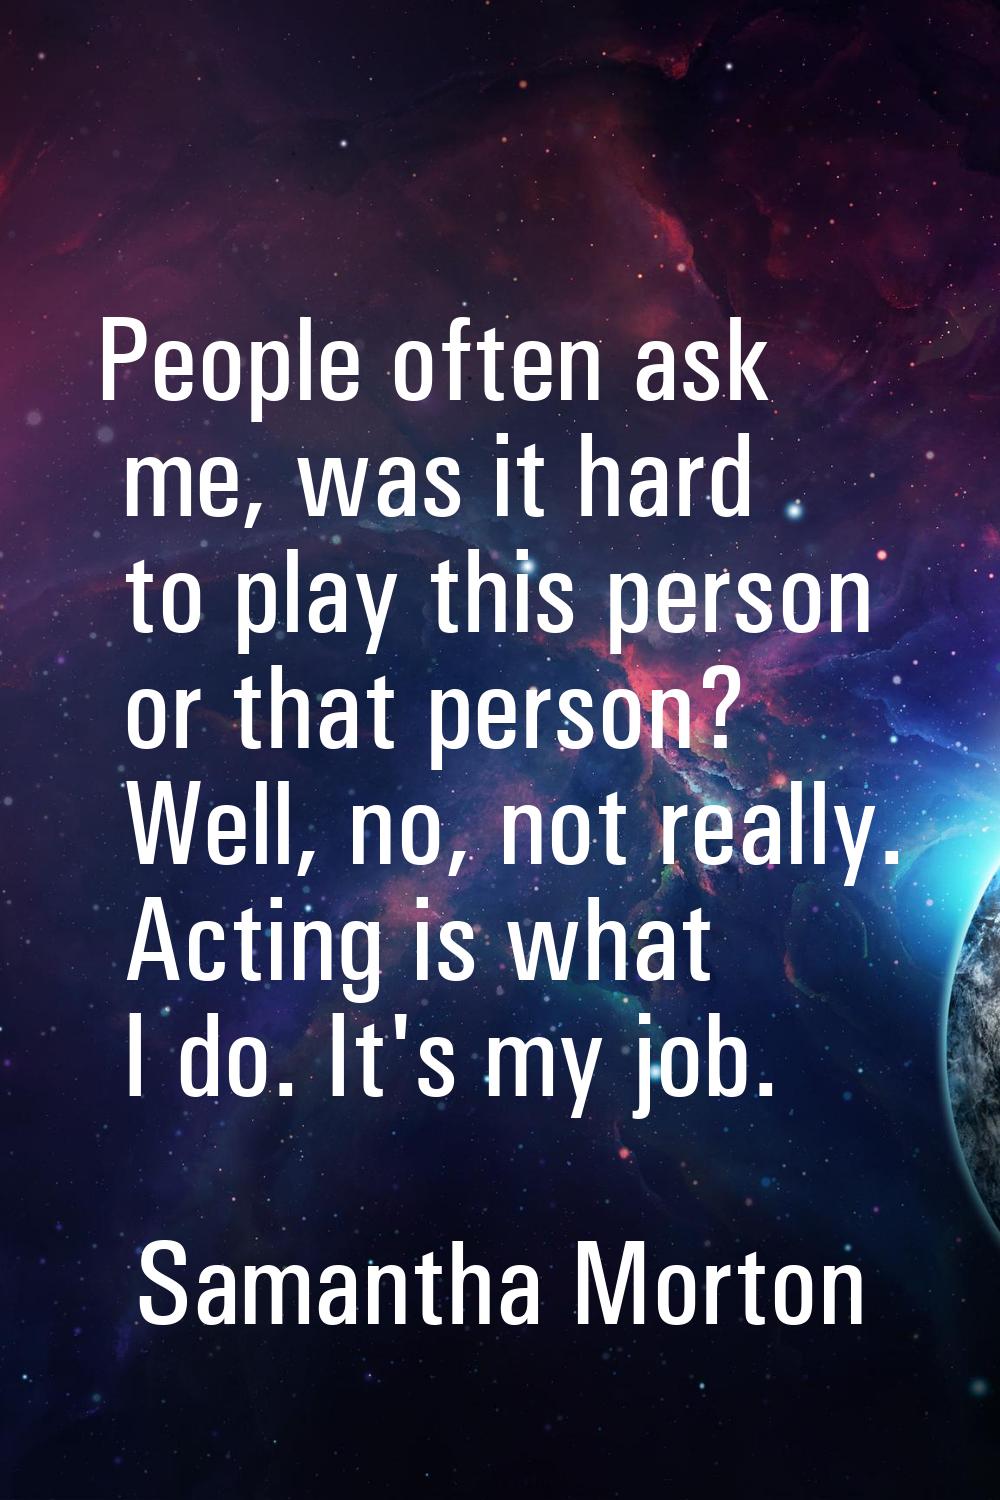 People often ask me, was it hard to play this person or that person? Well, no, not really. Acting i